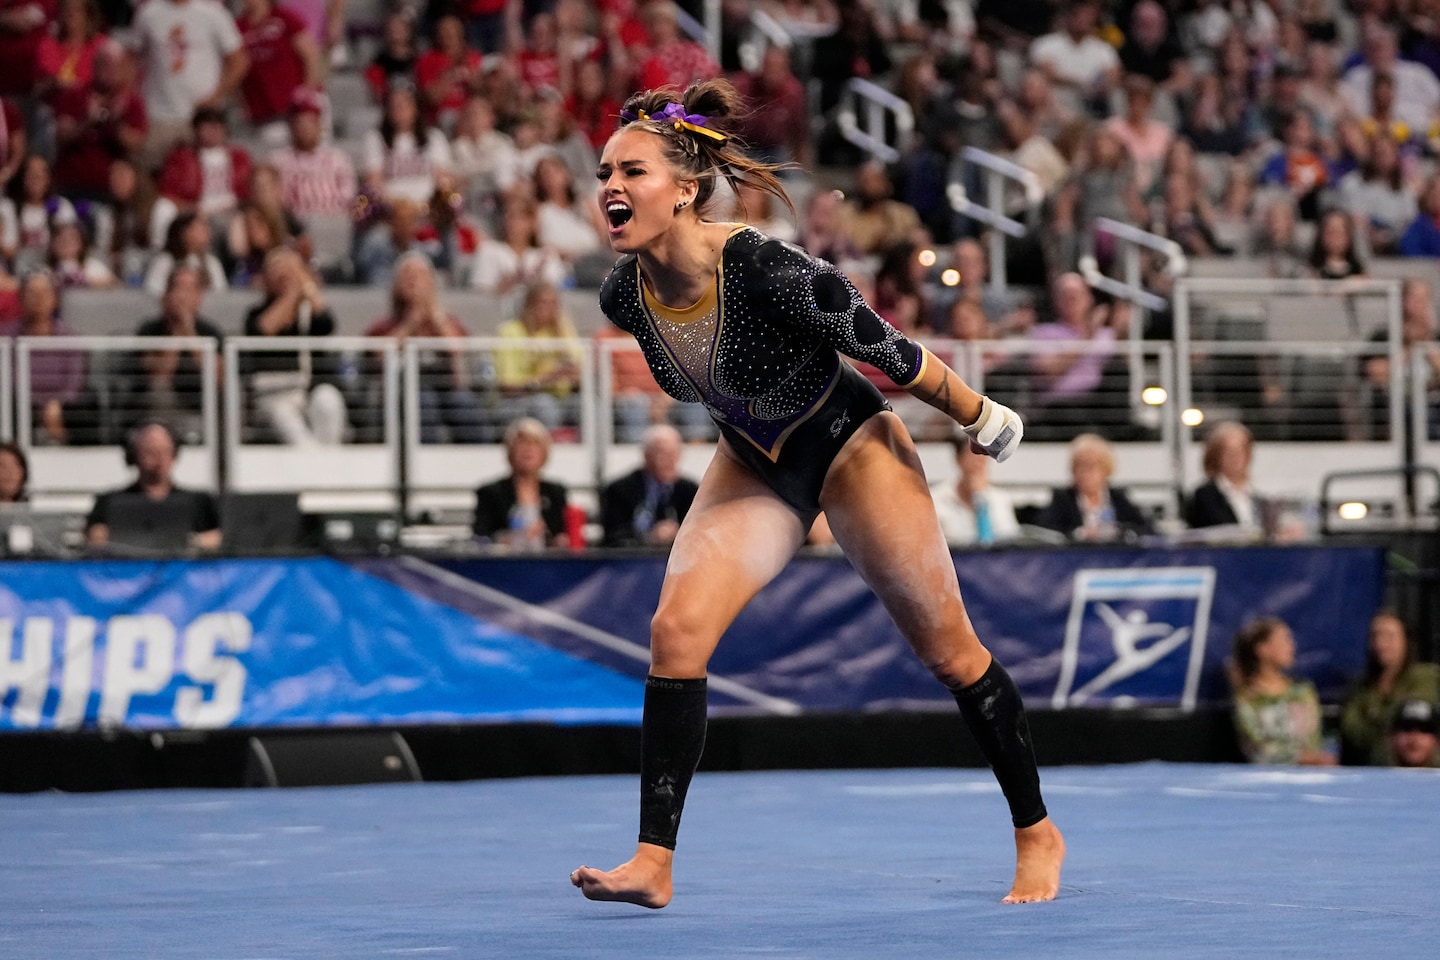 LSU’s gymnasts are stars online – and hunting their first NCAA title